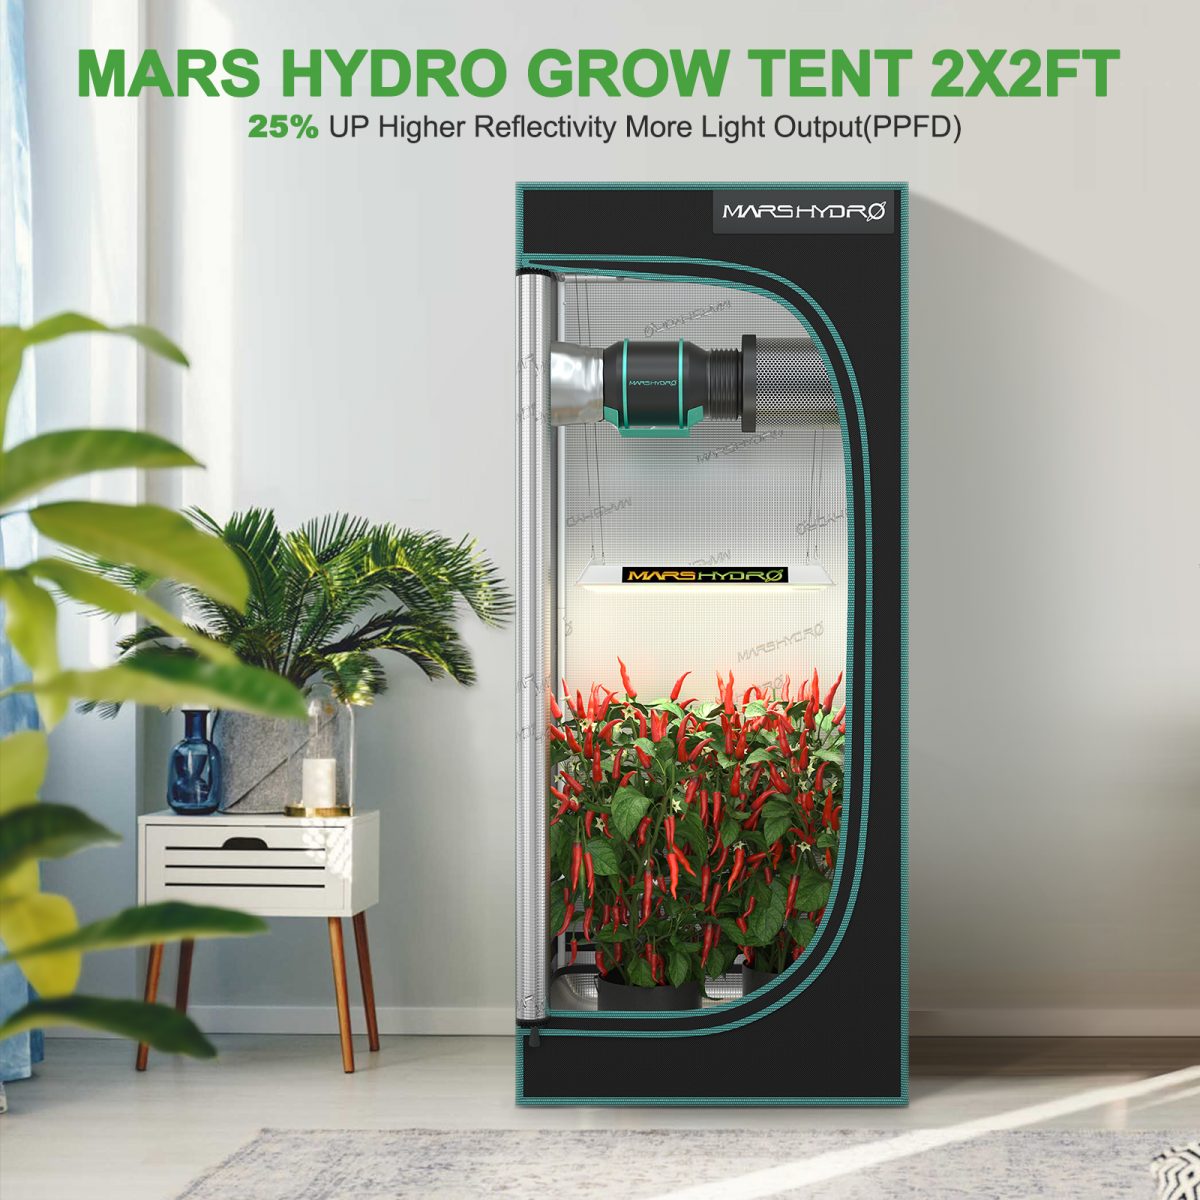 Mars Hydro TS600 is a full spectrum LED grow light with a low upfront cost and good results, for novices who are interested in growing indoor plants. TS600 can bring obvious improvements to 1-2 plants. Wattage - 100w Veg Coverage - 2x2 ft Flower Coverage - 1.5x1.5 ft The overwhelming choice for most growers applying in grow tent, small room, cabinet & closet, and plant shelves.